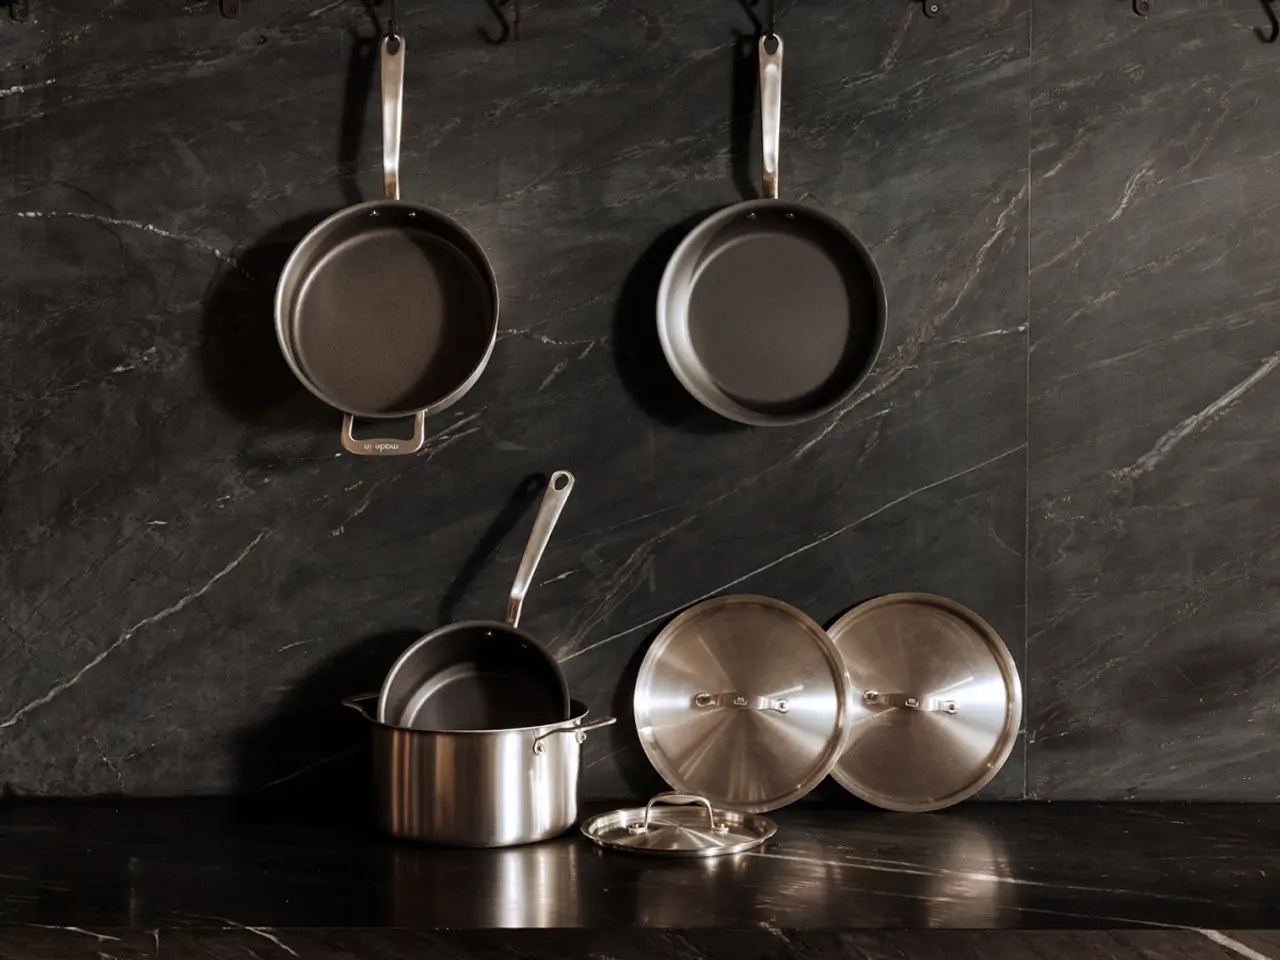 Several pots and pans are neatly arranged against a dark marble backdrop.